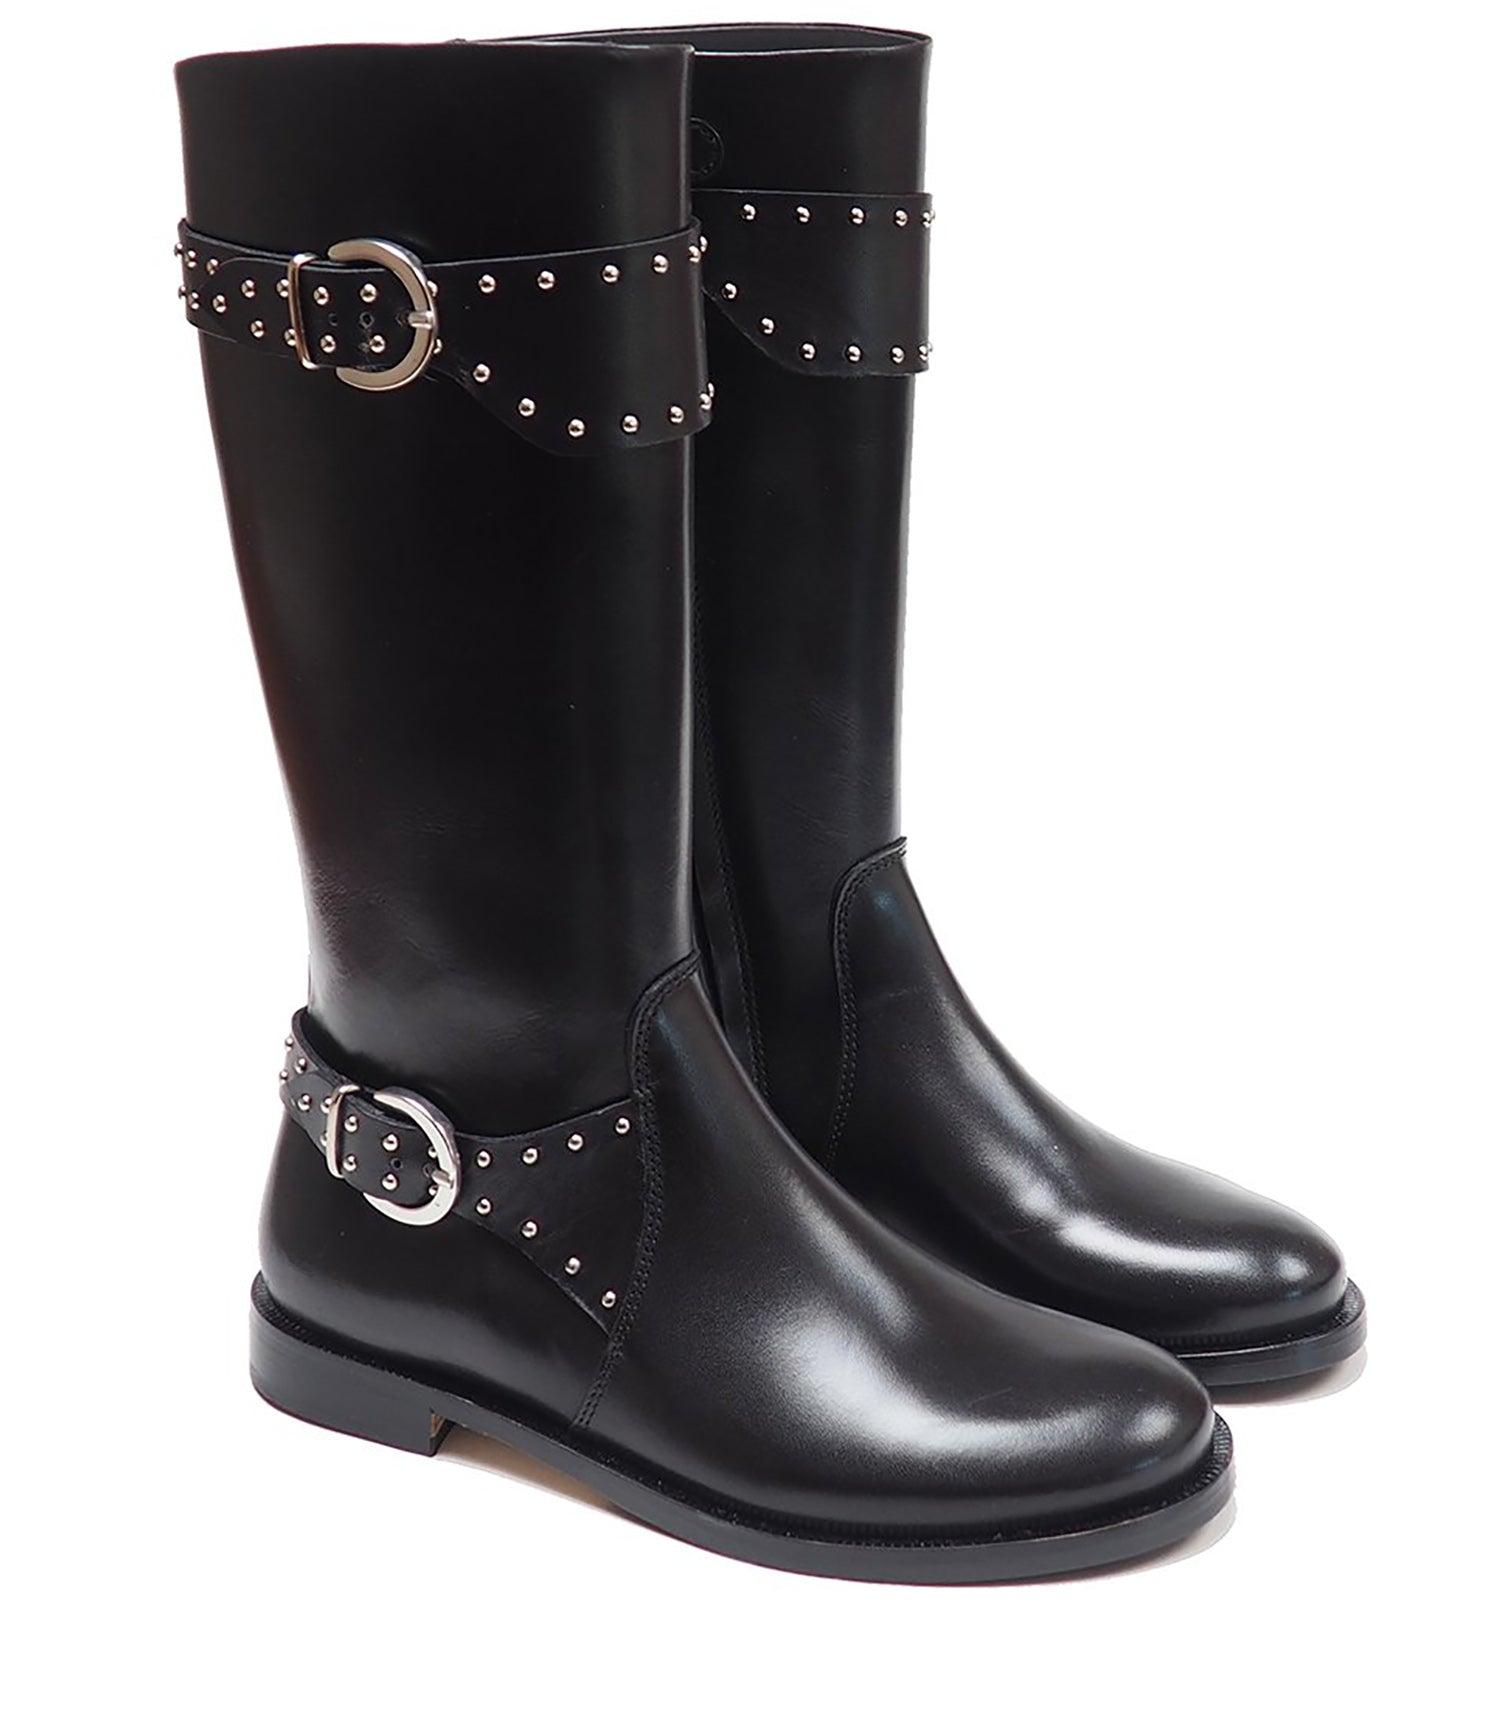 boots with buckles and studs